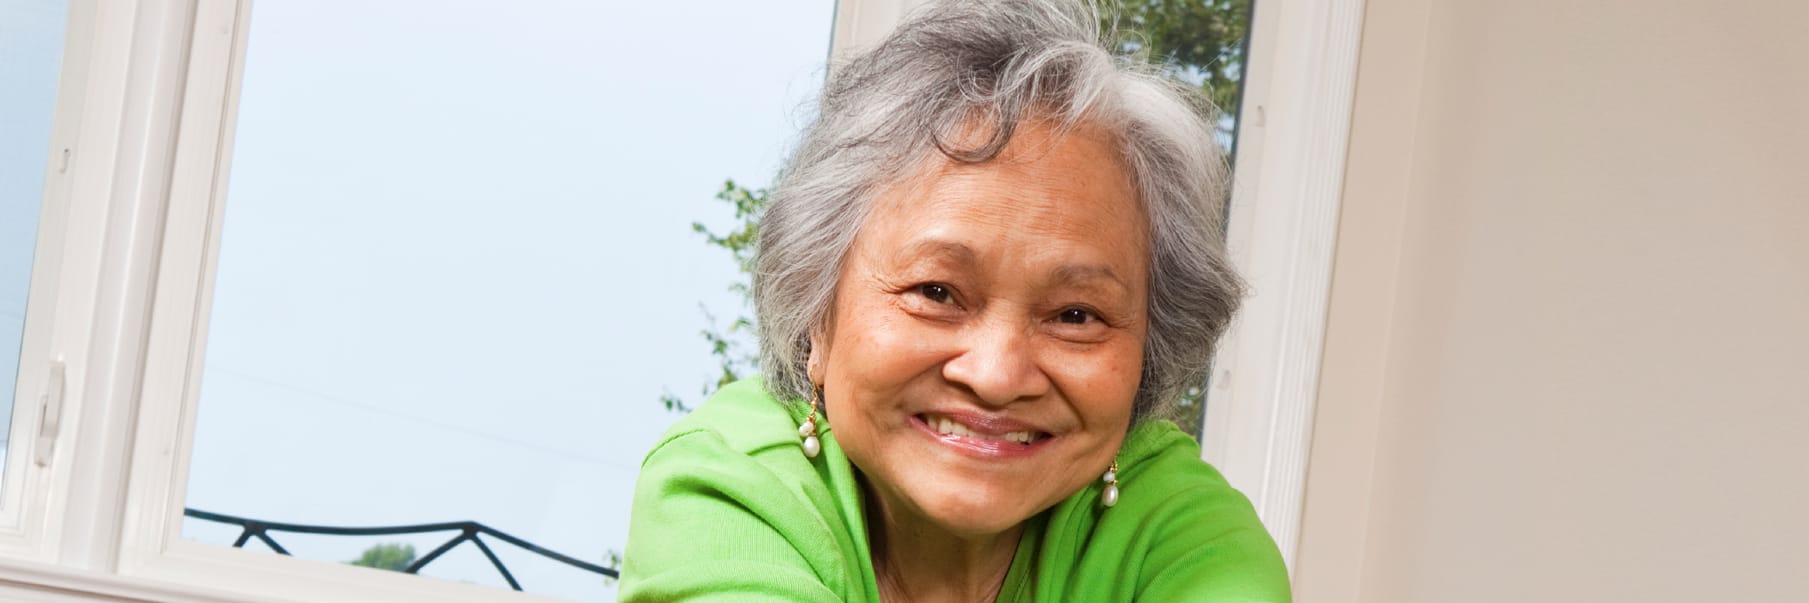 smiling older woman in a green shirt